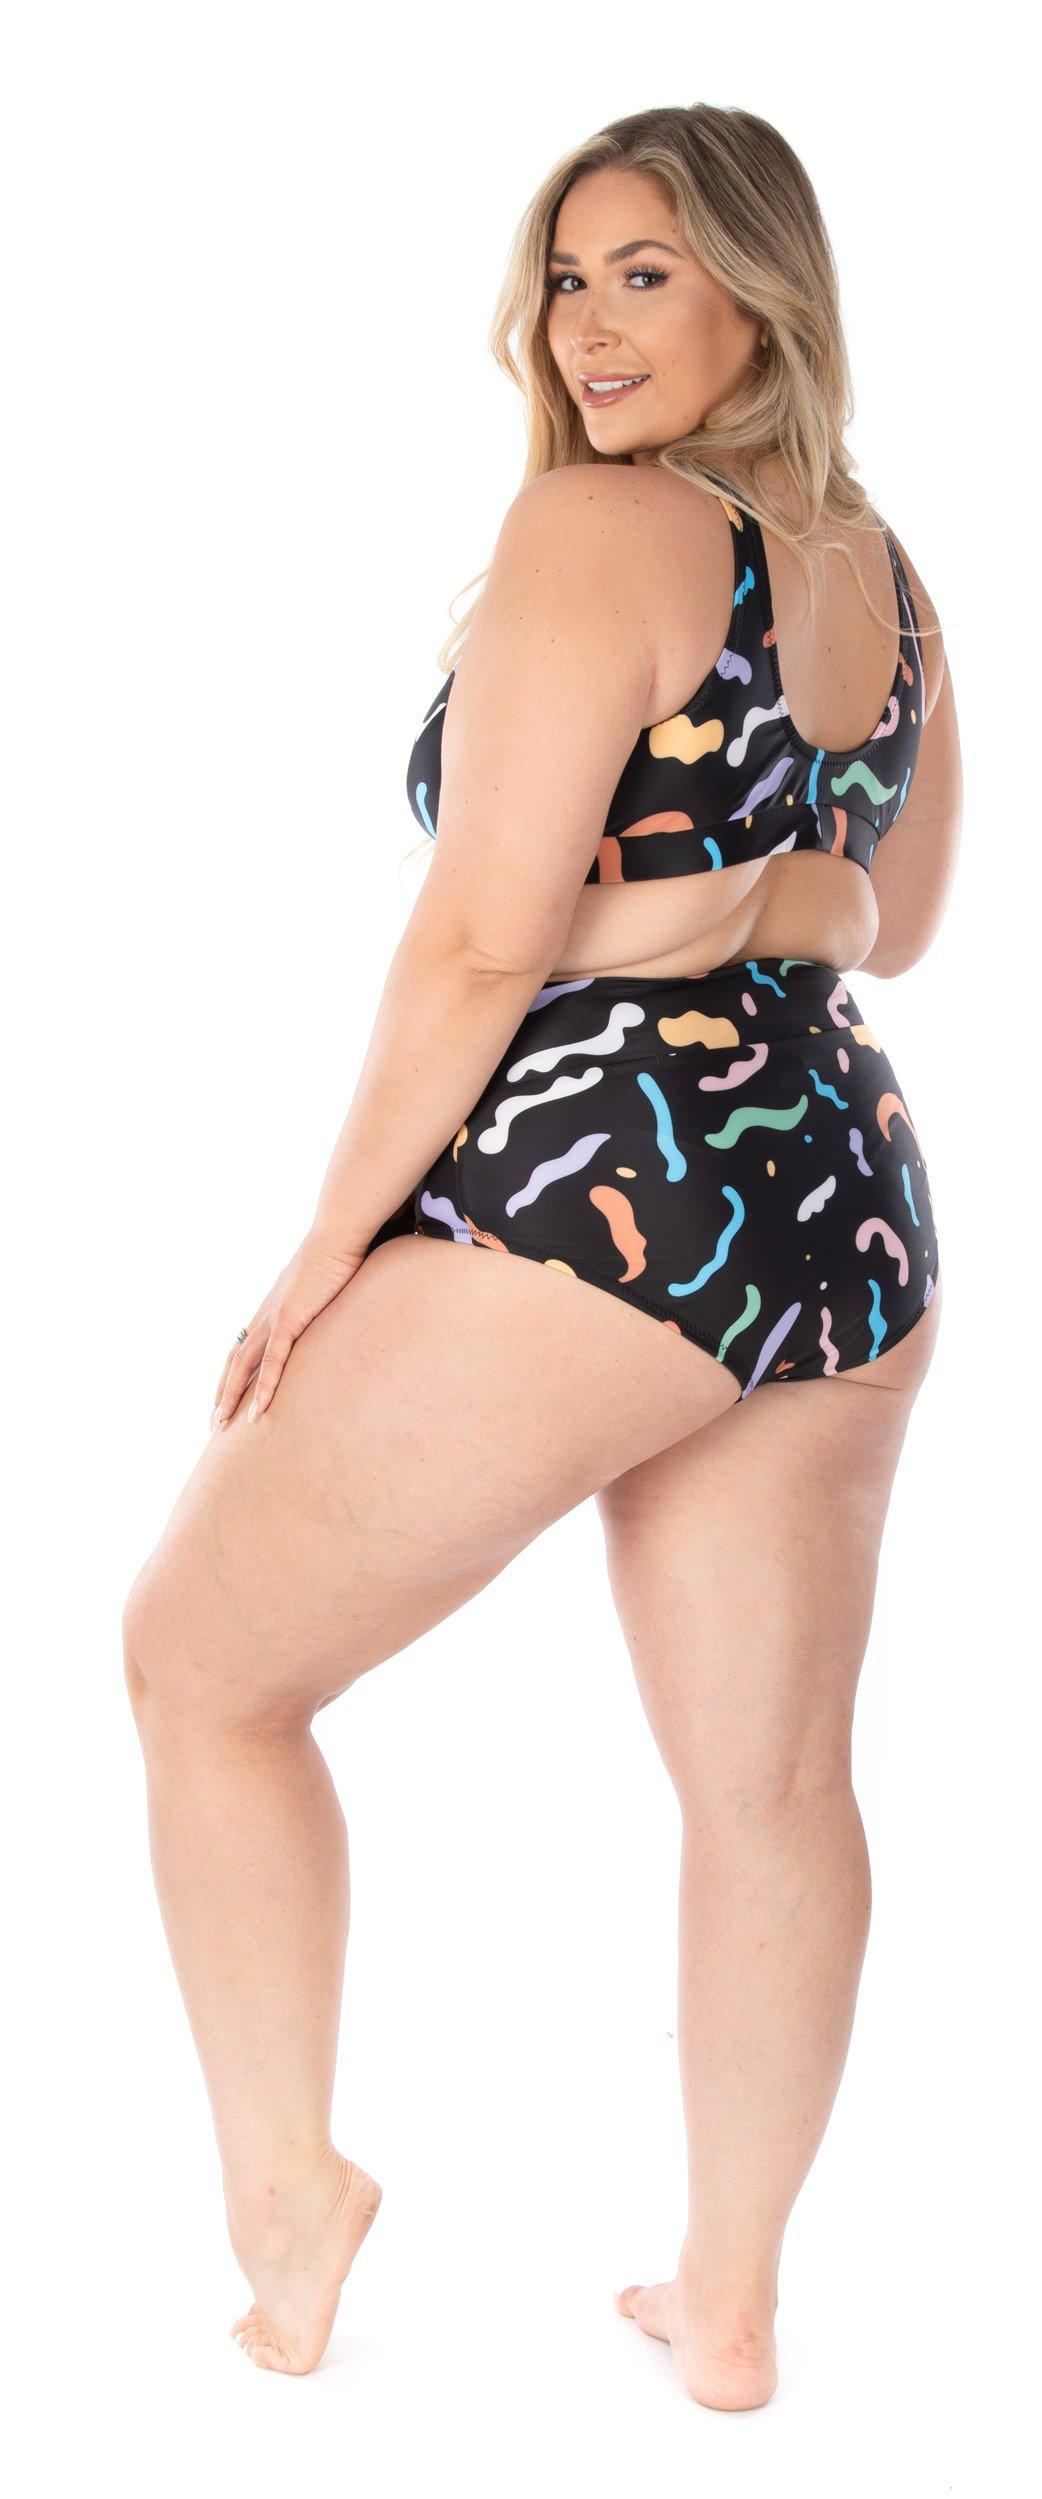 This bikini pattern has a low scoop back and a waist tie that offers good coverage